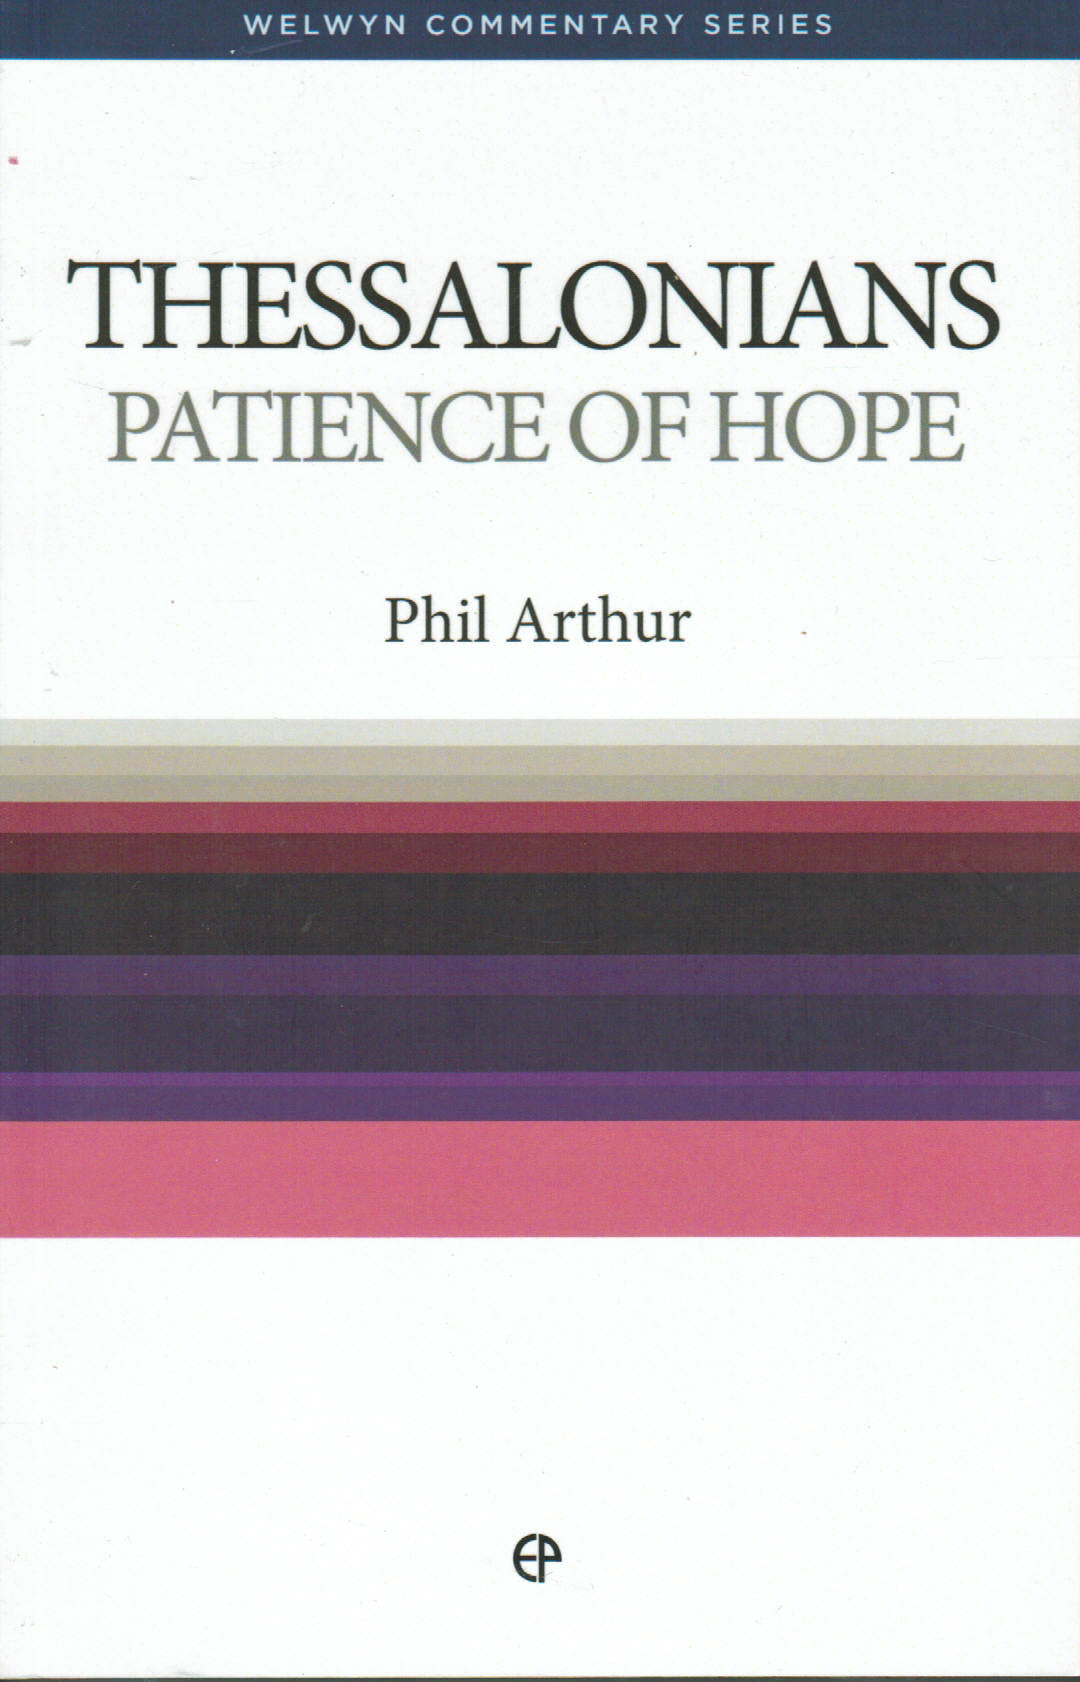 Welwyn Commentary Series - Thessalonians: Patience of Hope